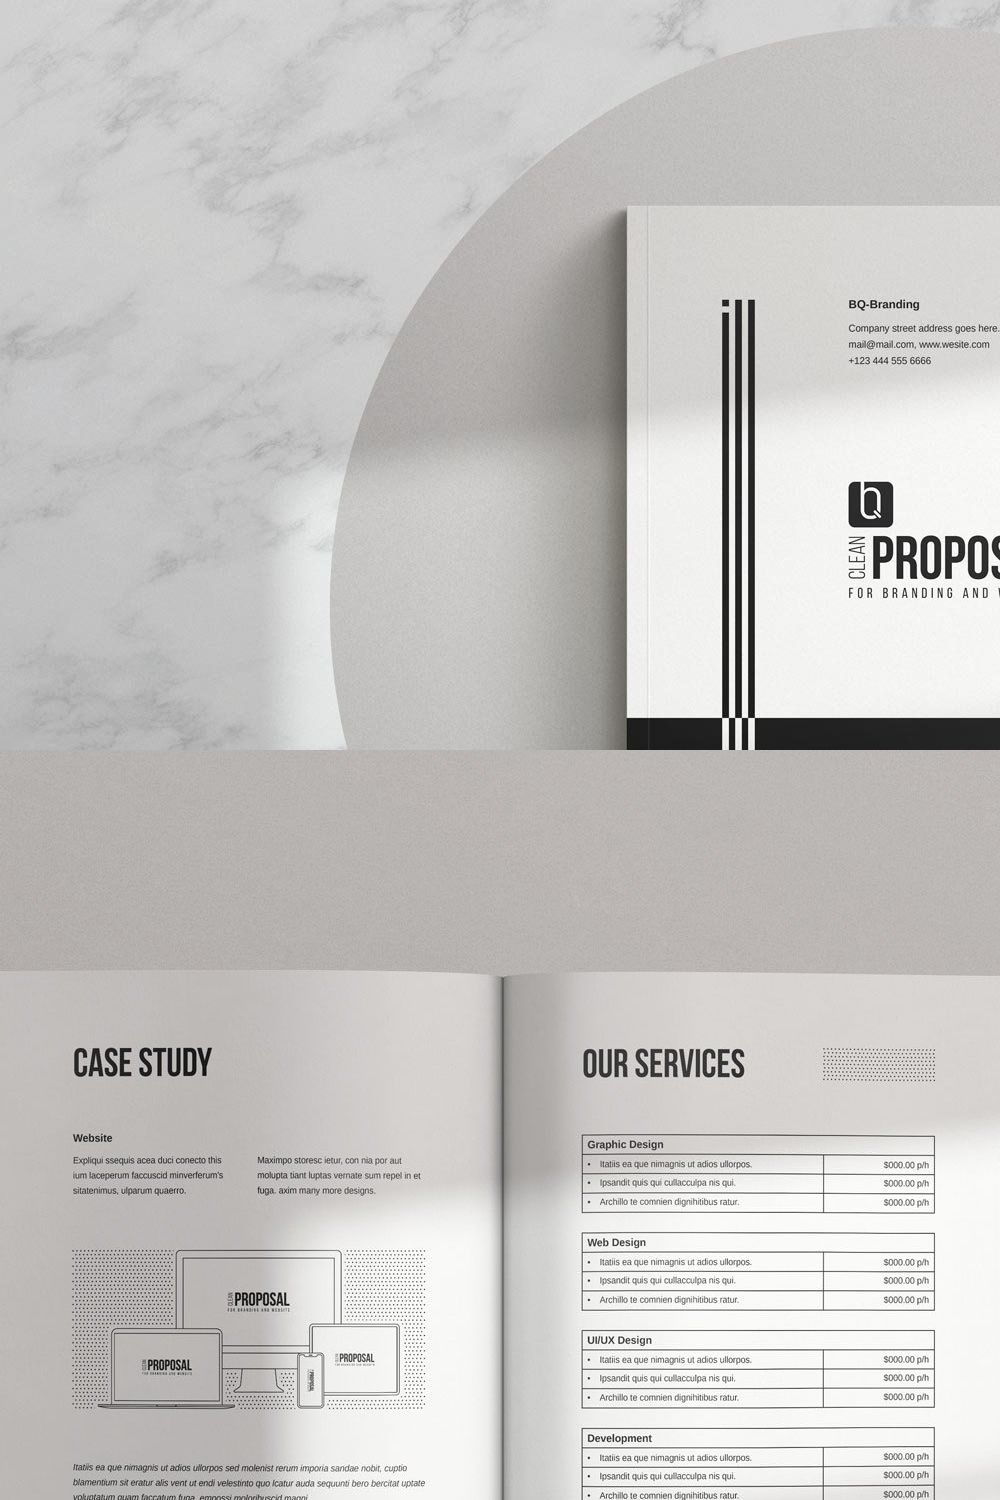 Project Proposal Template pinterest preview image.